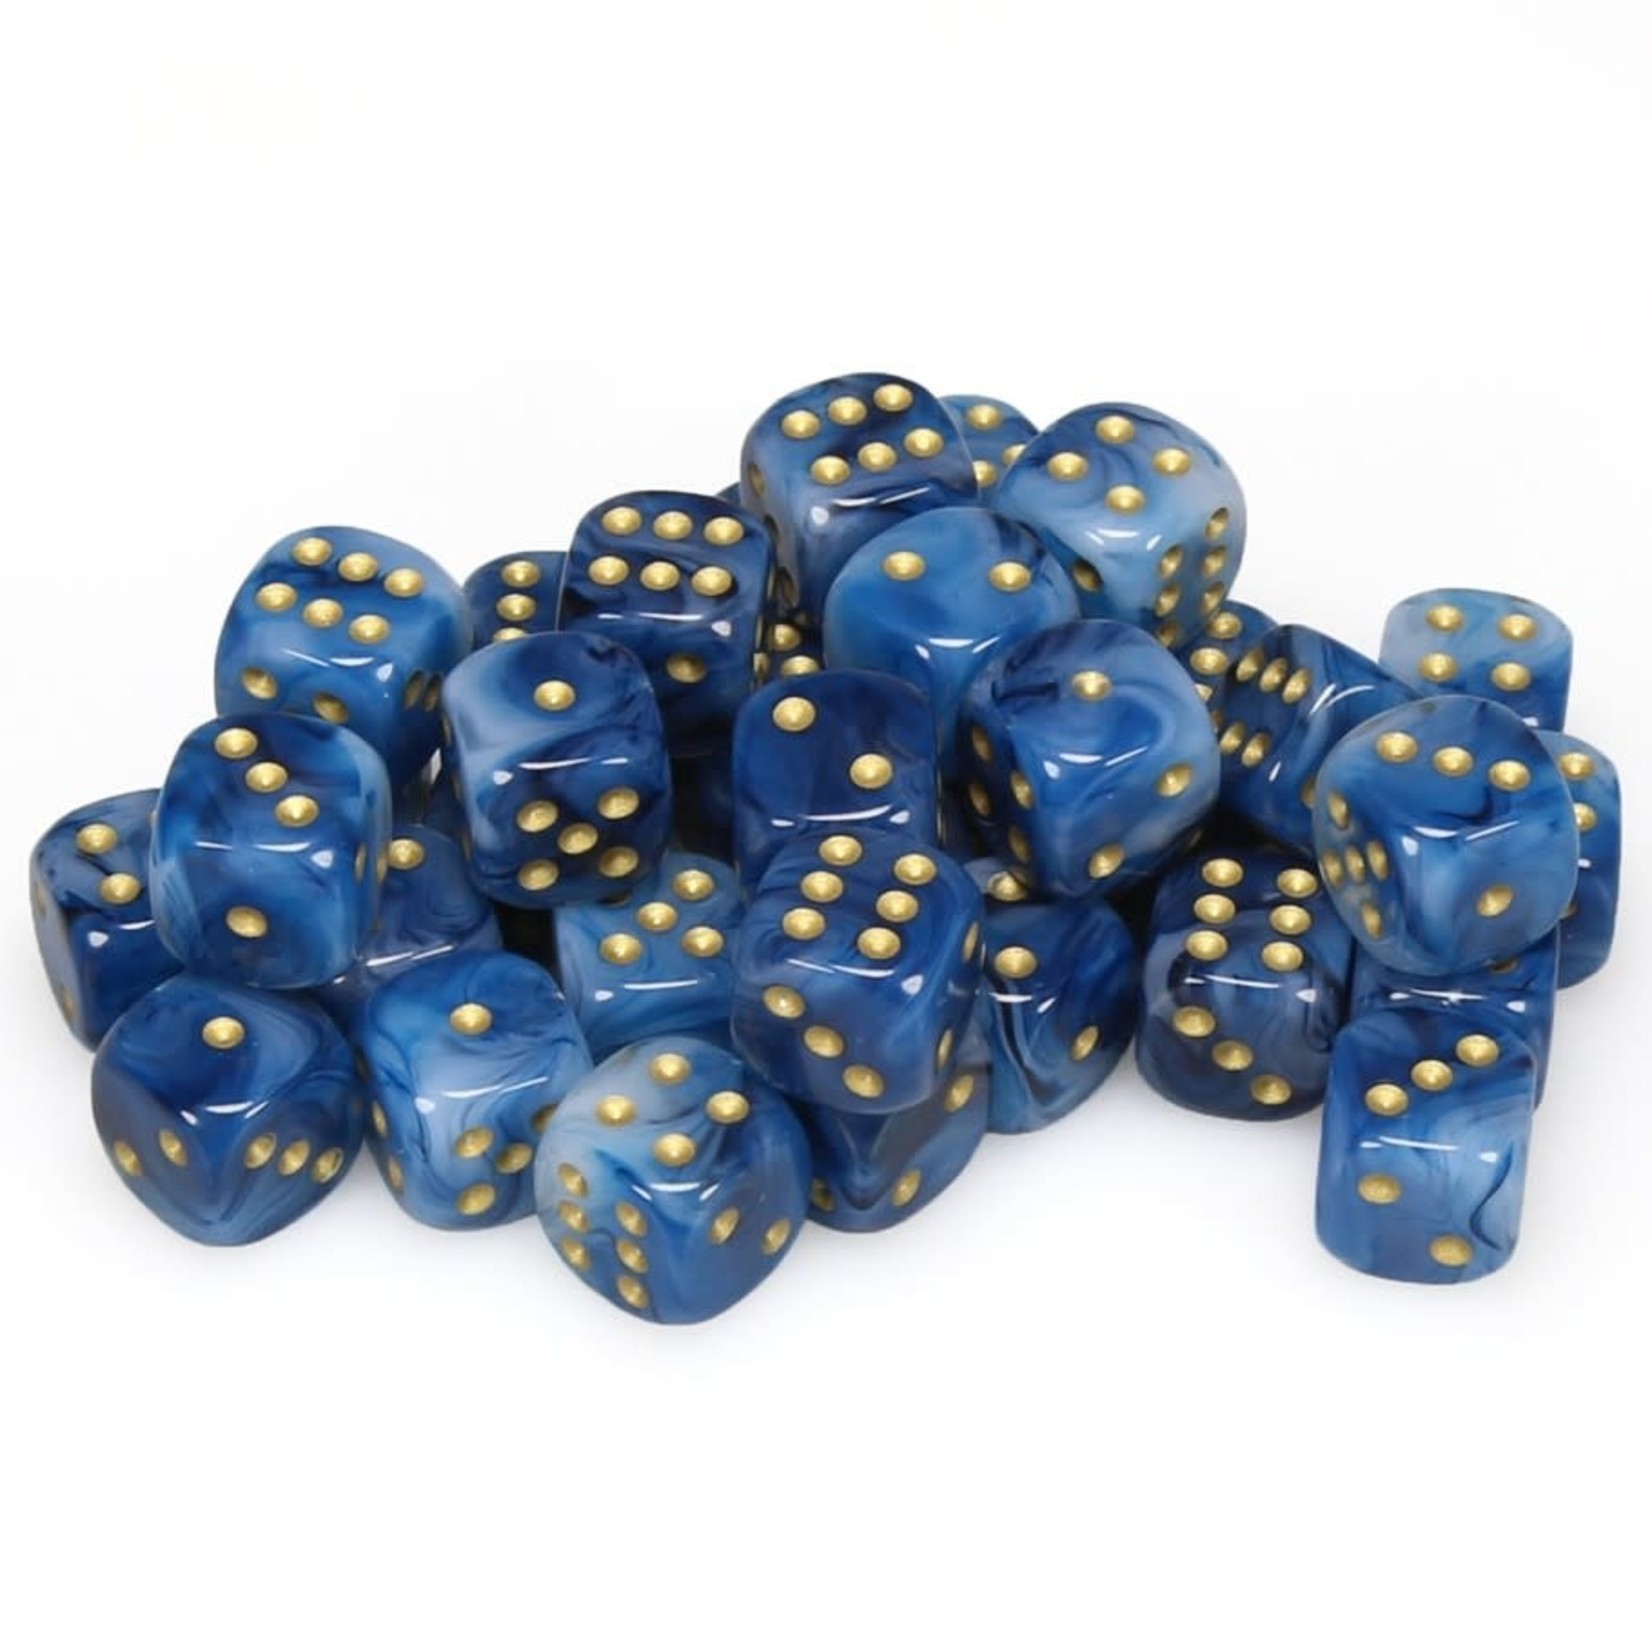 Chessex Chessex Phantom Teal with Gold 12 mm d6 36 die set